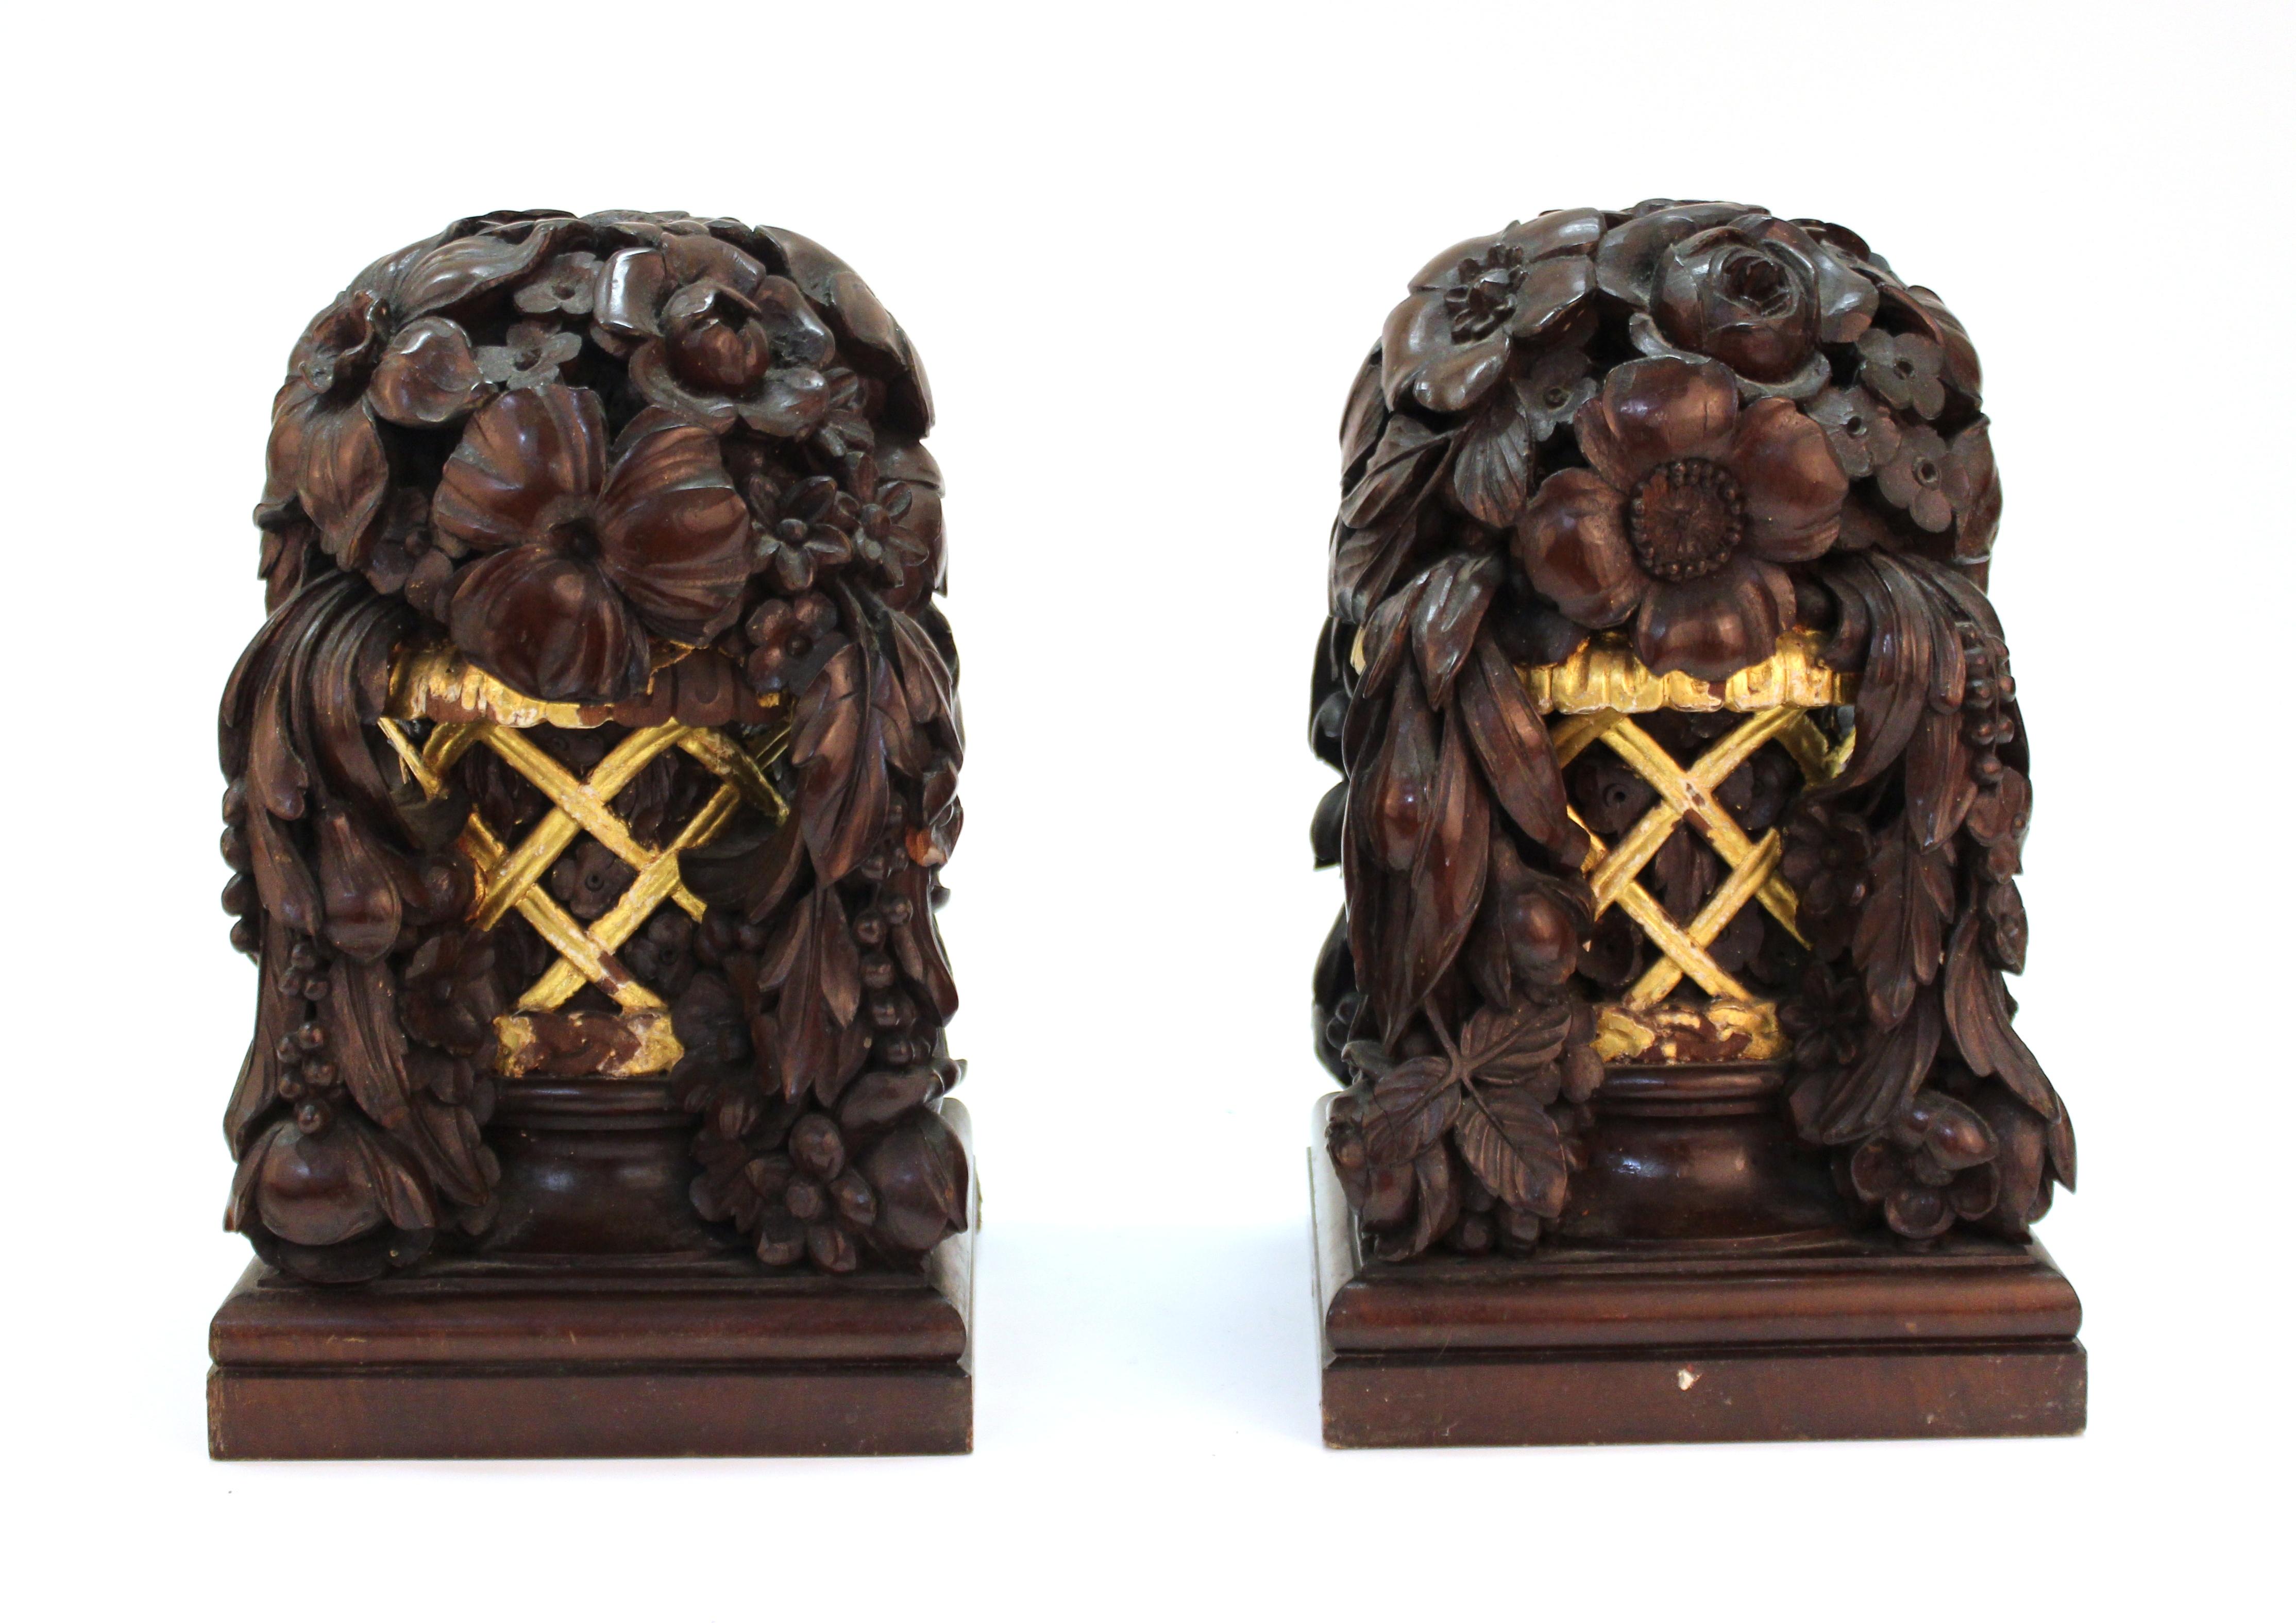 French Art Deco carved and partially gilt wood decorative floral baskets with cascading fruit garlands attributed to French designers Louis Sue and Andre Mare. The pair was likely designed as decorative finials or architectural elements for an Art